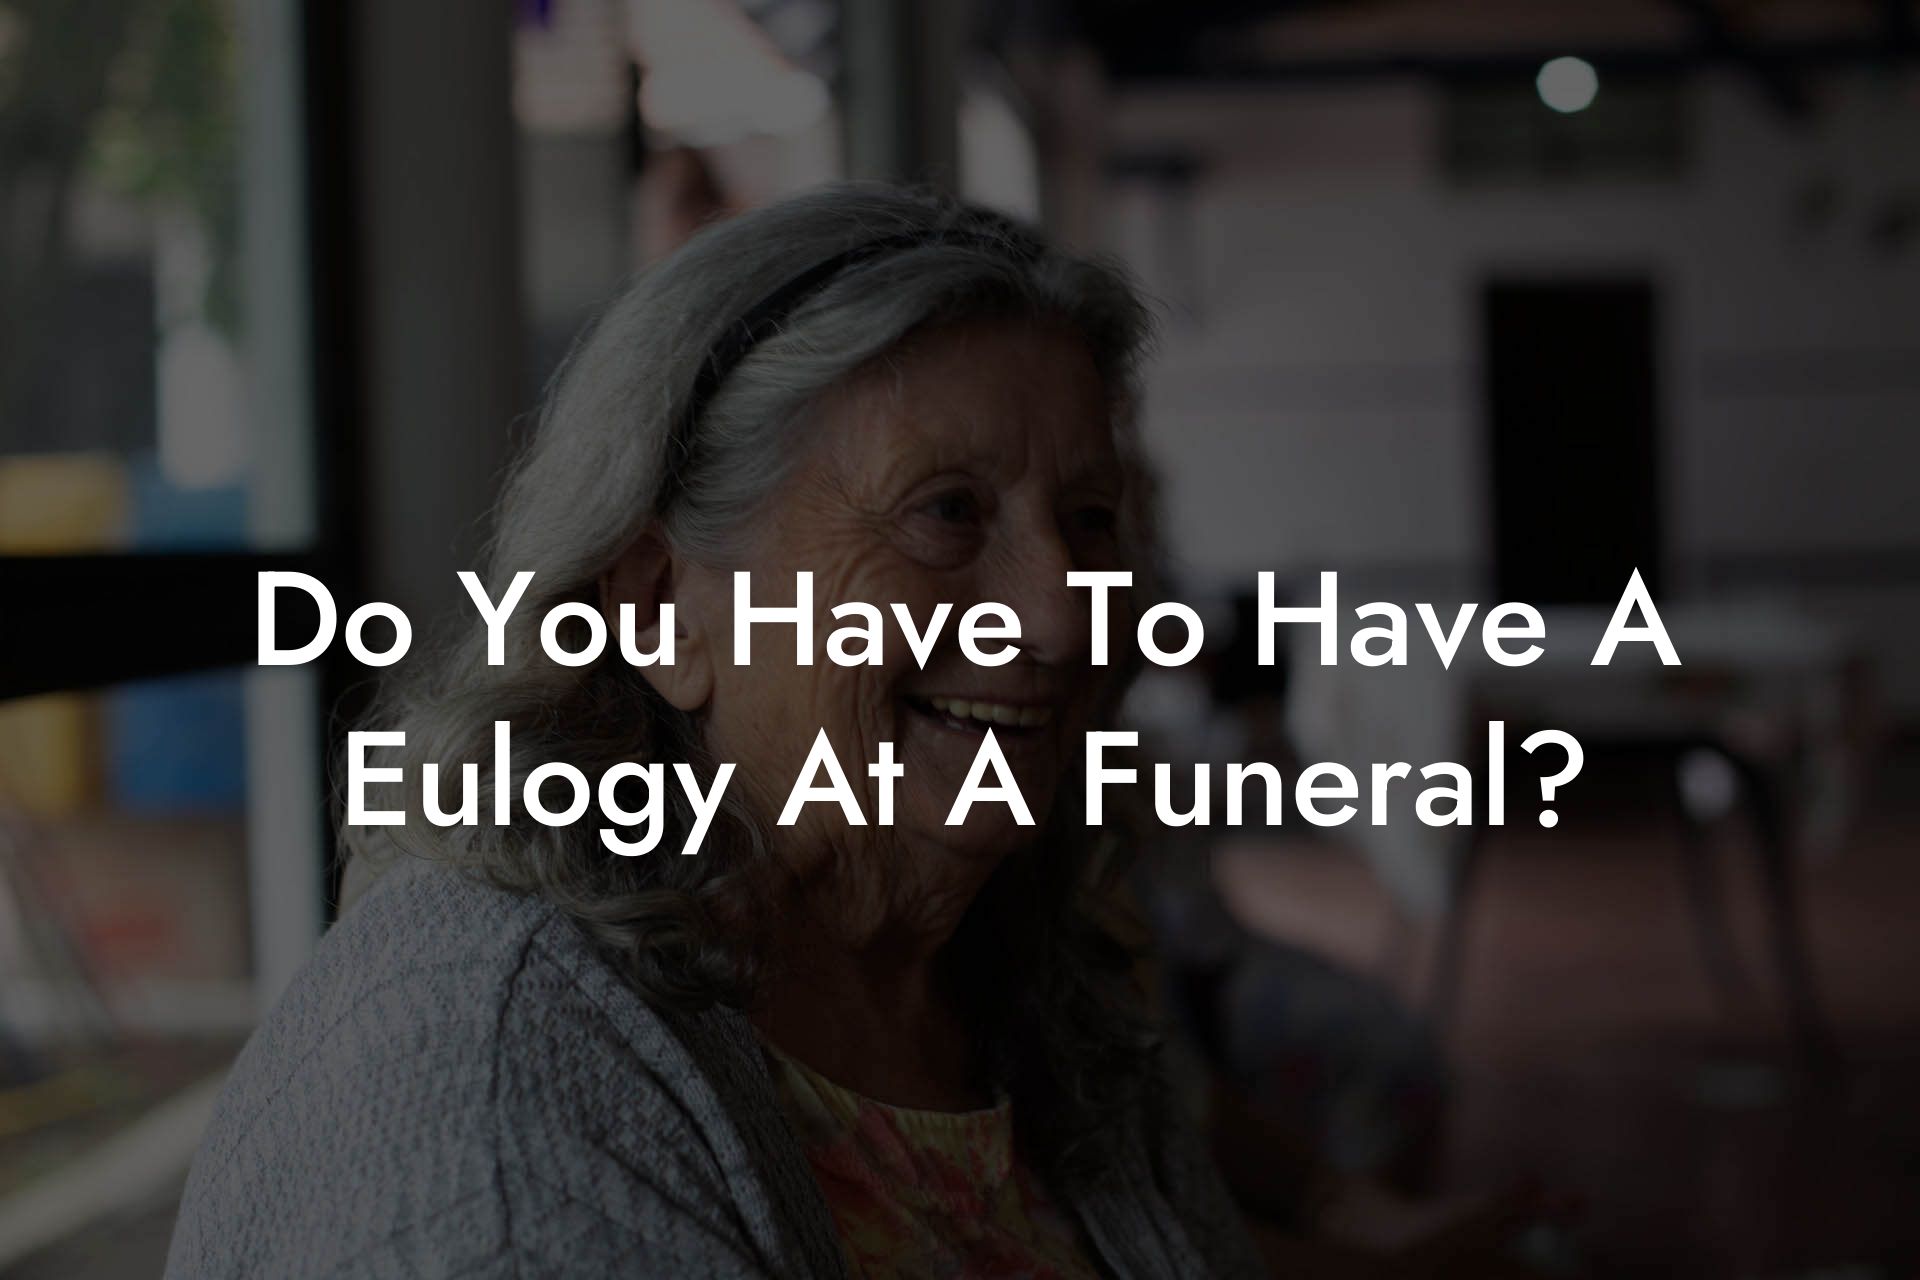 Do You Have To Have A Eulogy At A Funeral?